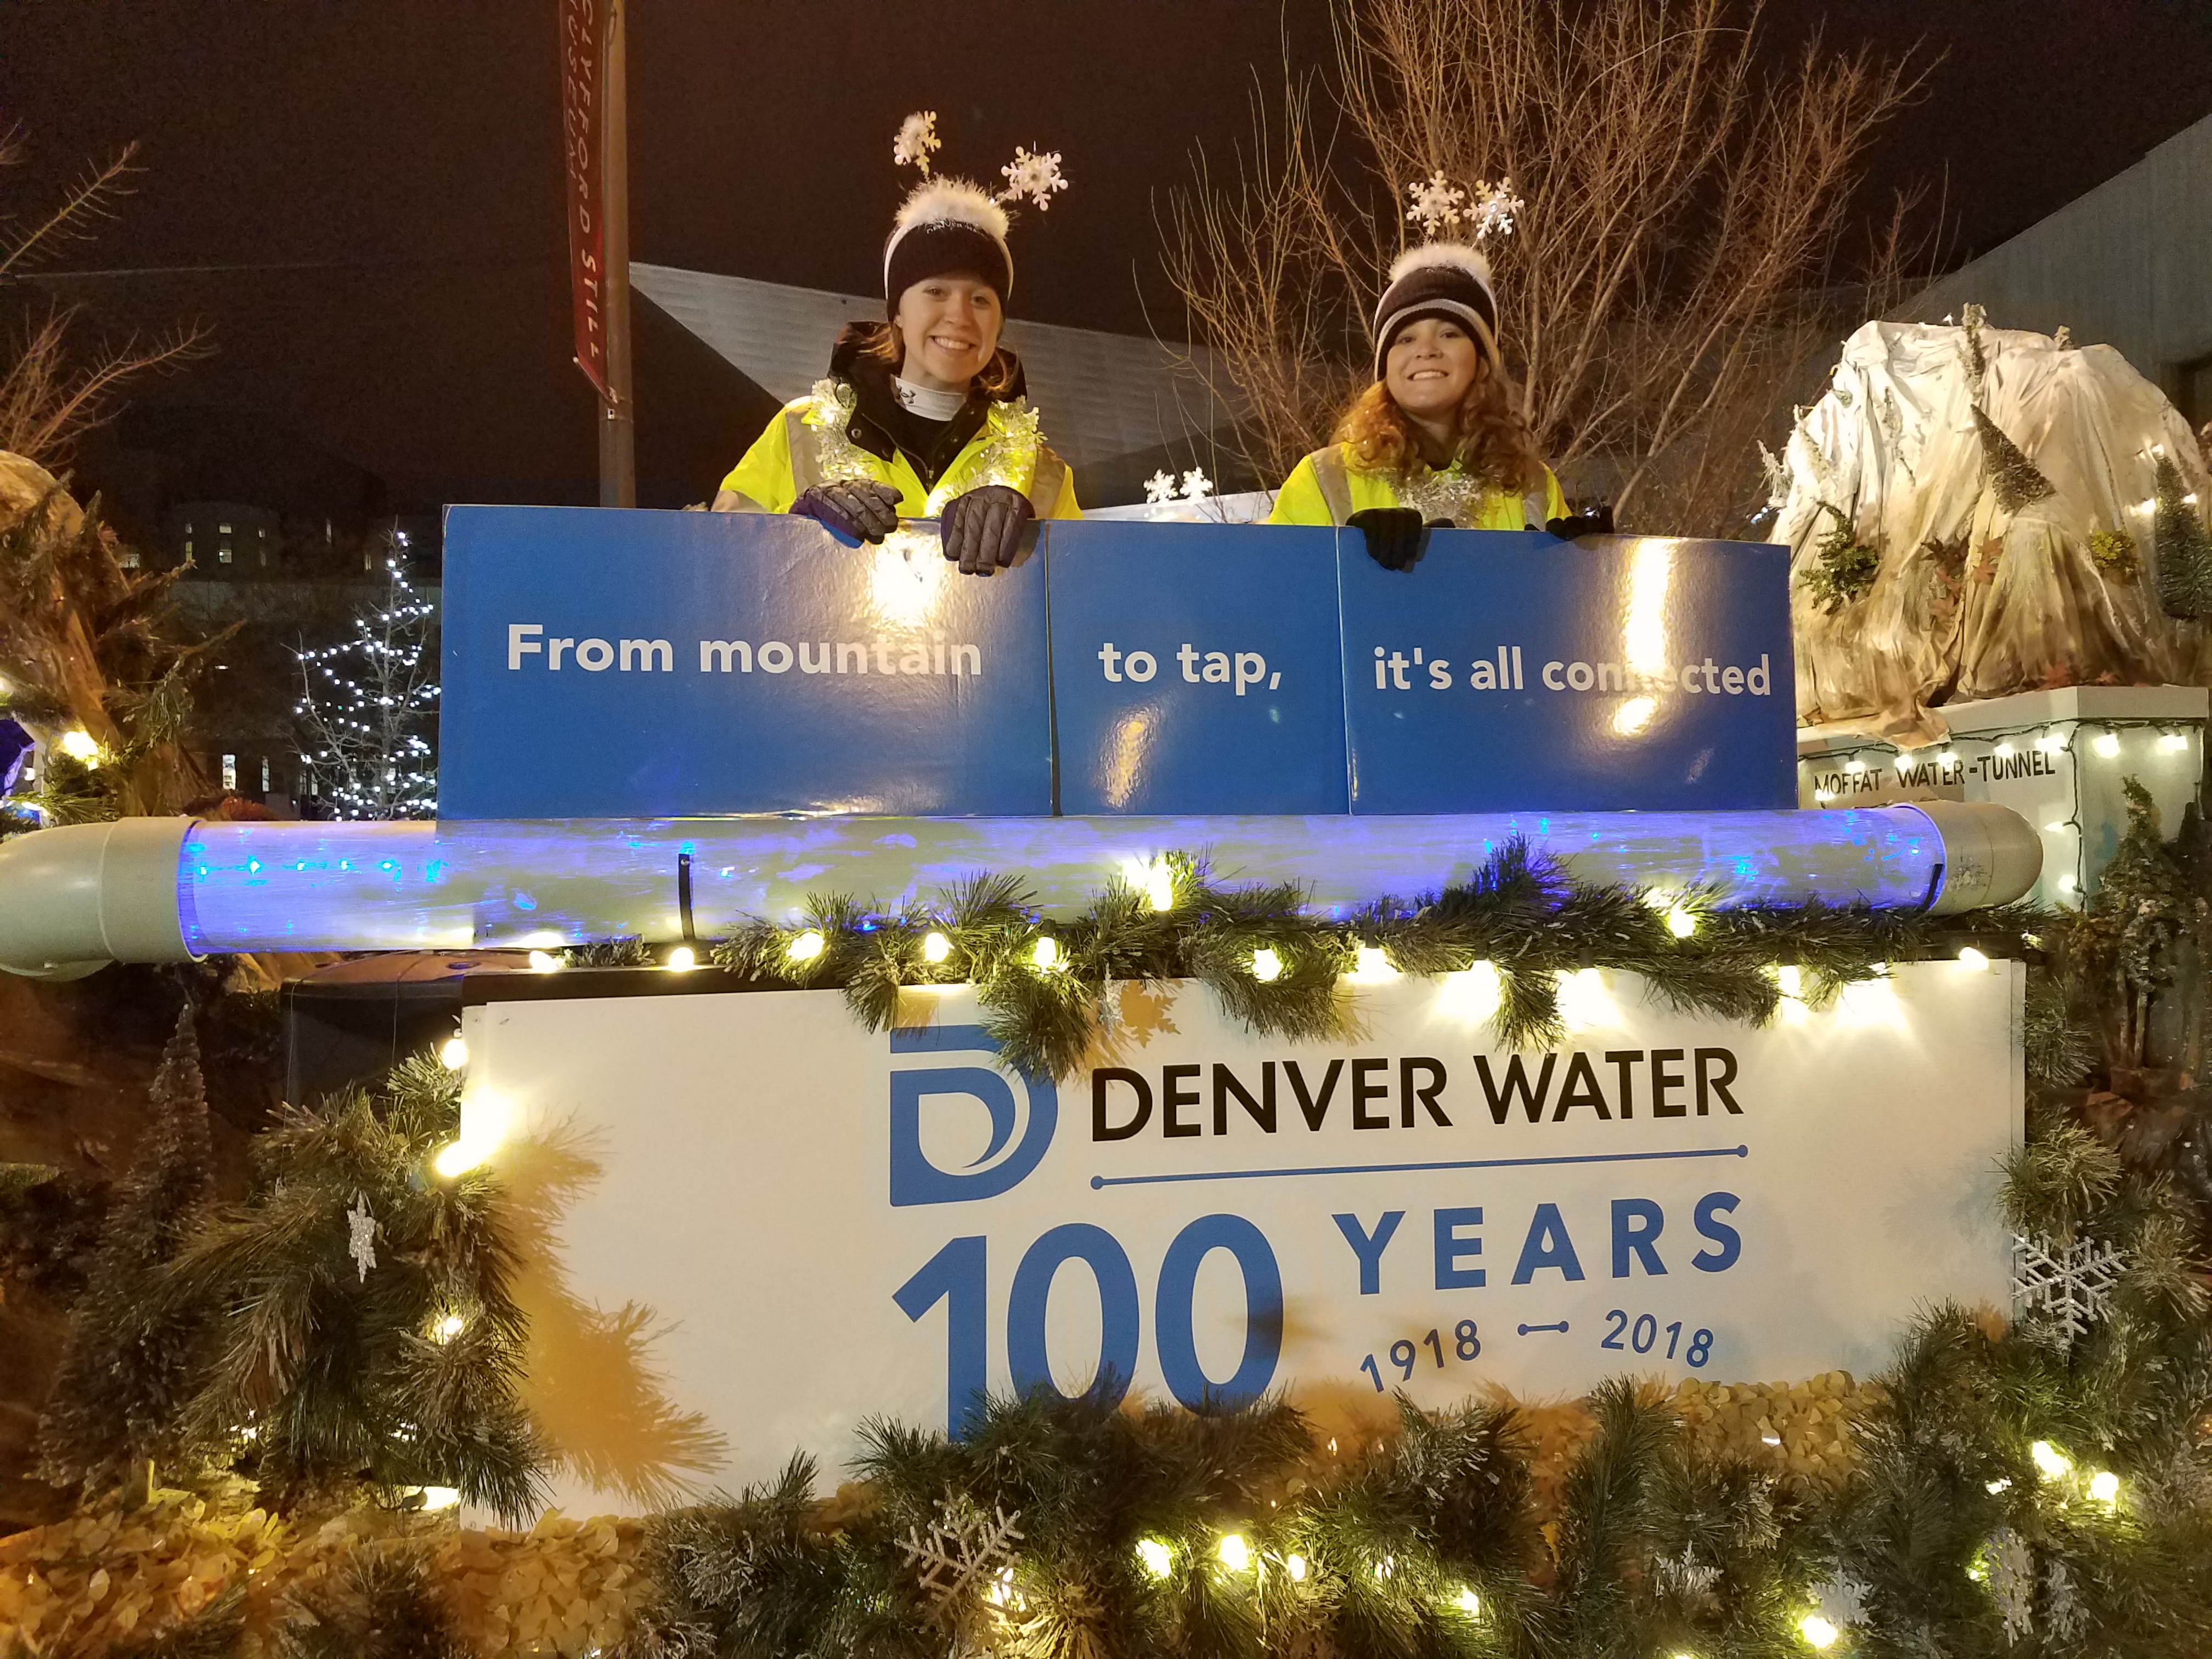 A closer look at the banner on the float saying "Denver Water, 100 years, 1918-2018). Two vwomen, smiling, hold signs that read "From mountain to tap, it's all connected."